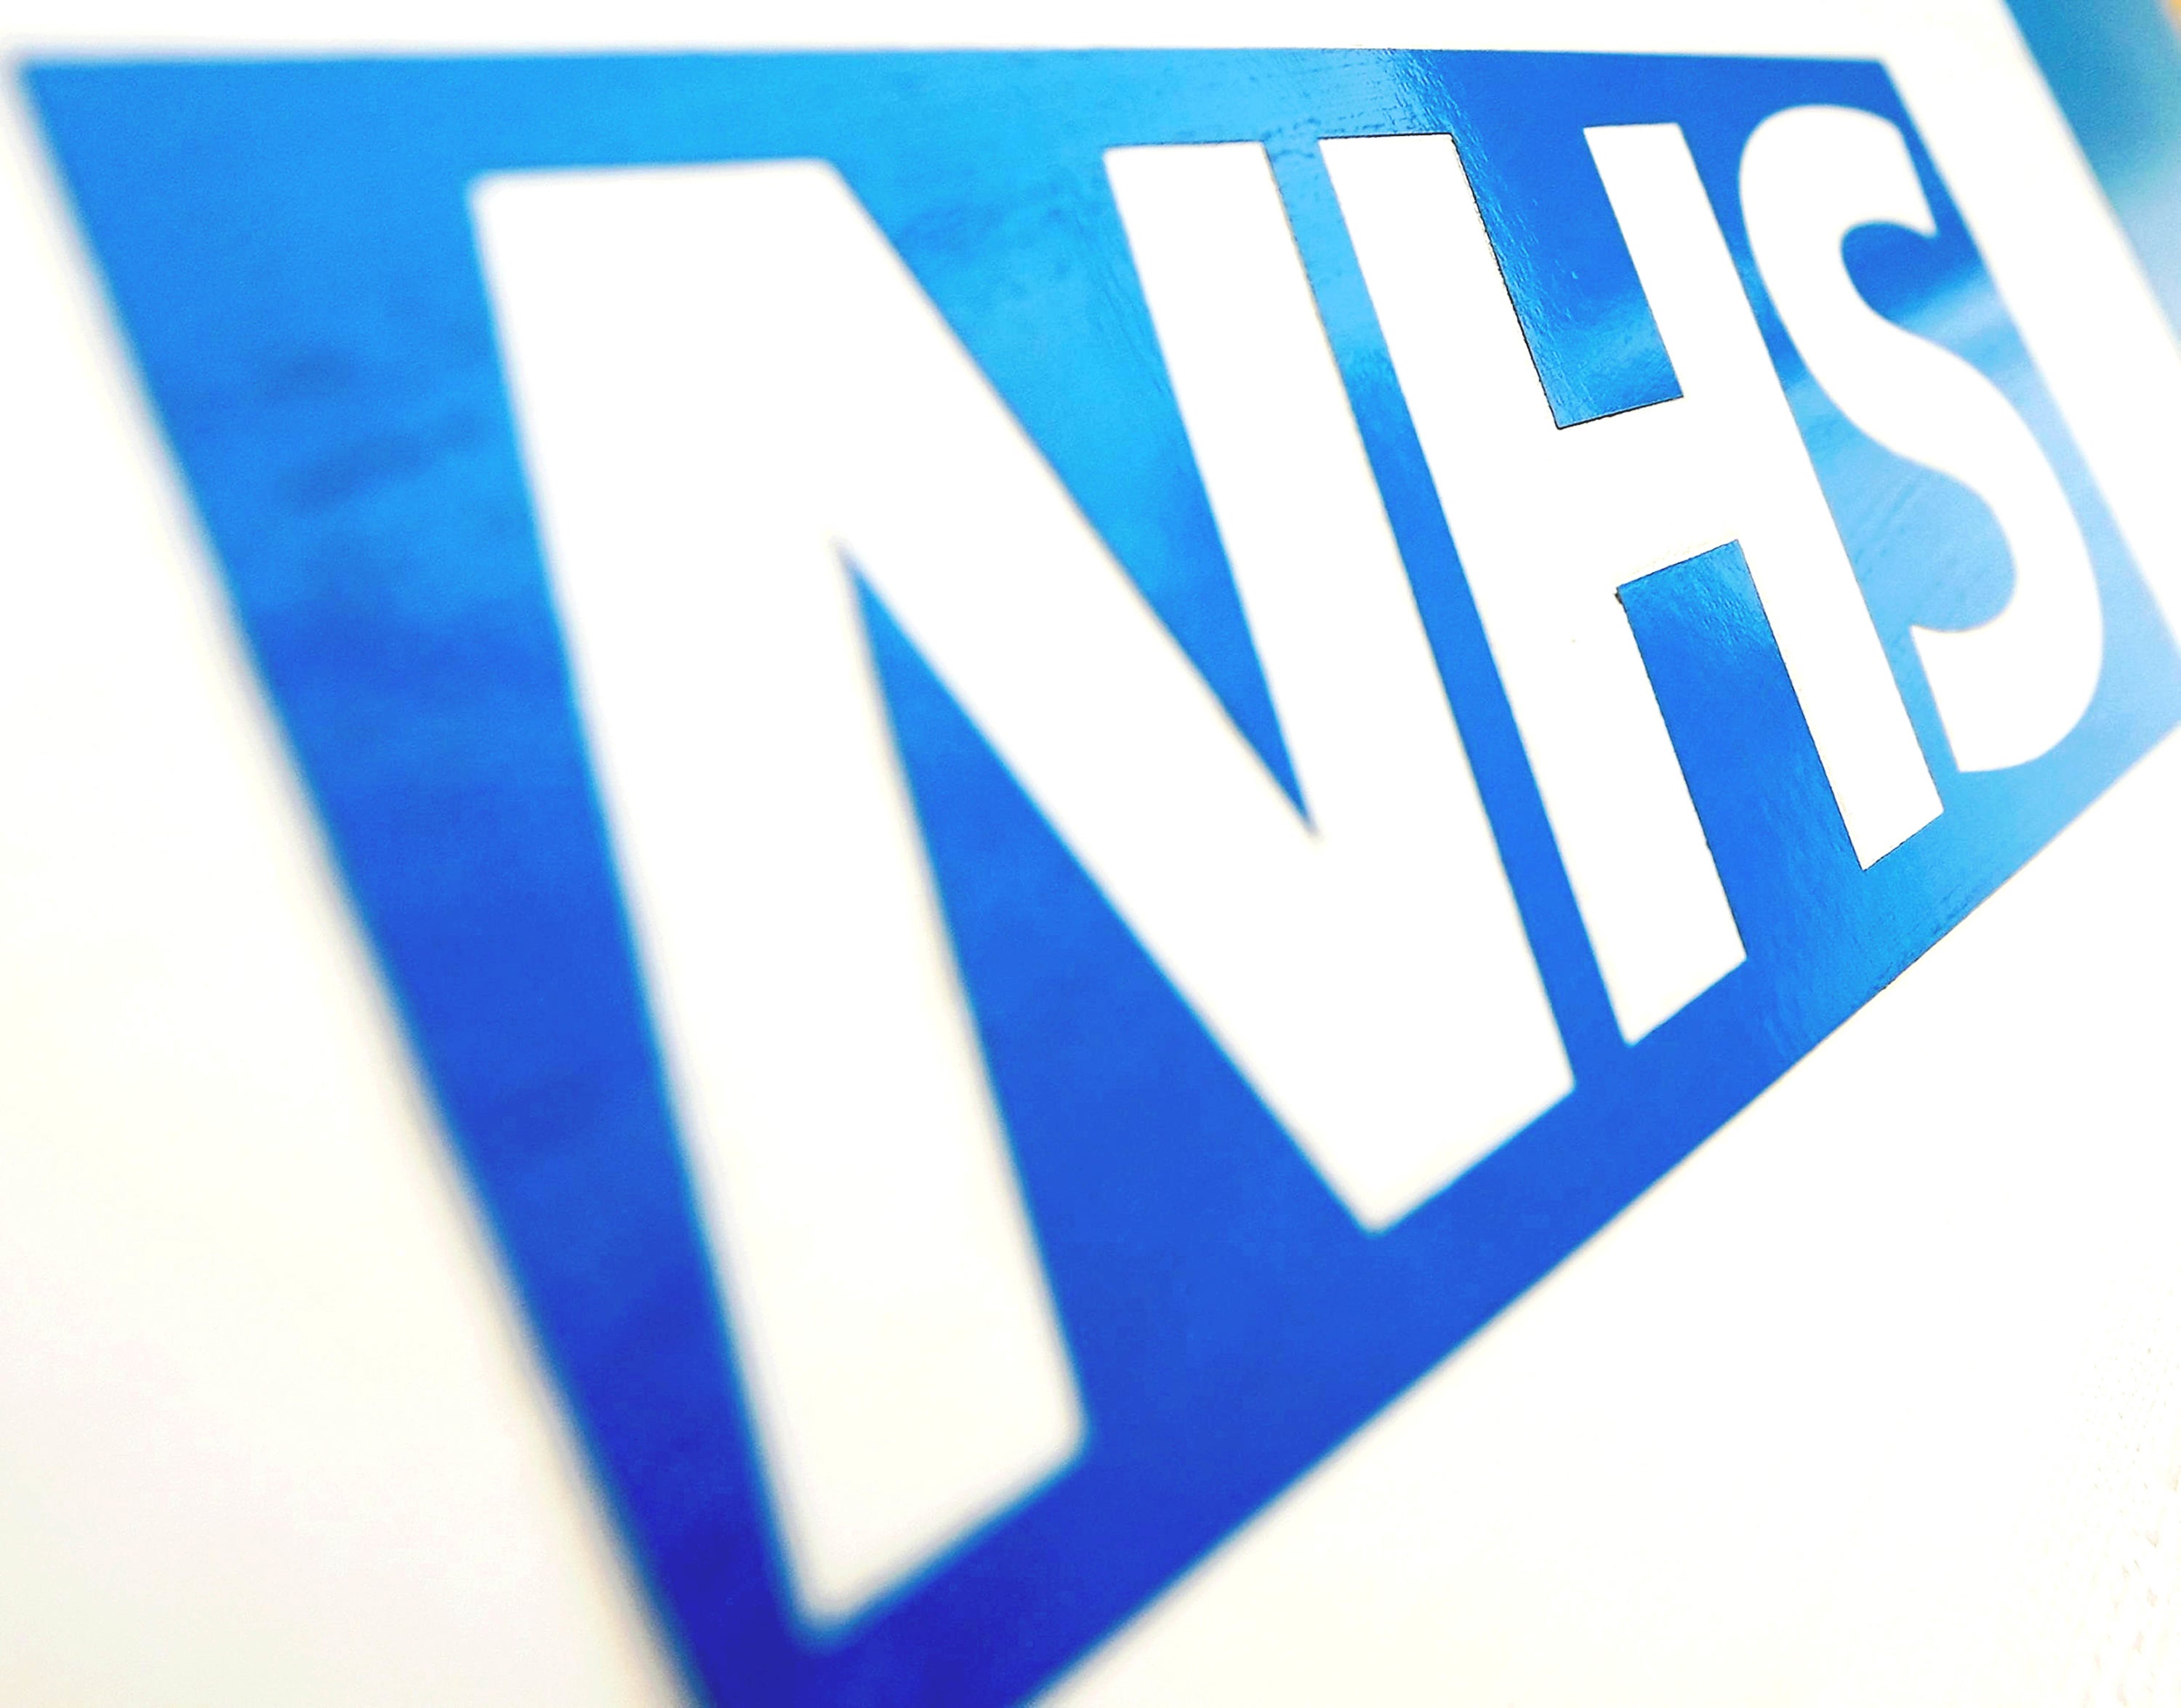 People have been warned of delays after a cyberattack affected the NHS 111 service (Dominic Lipinski/PA)